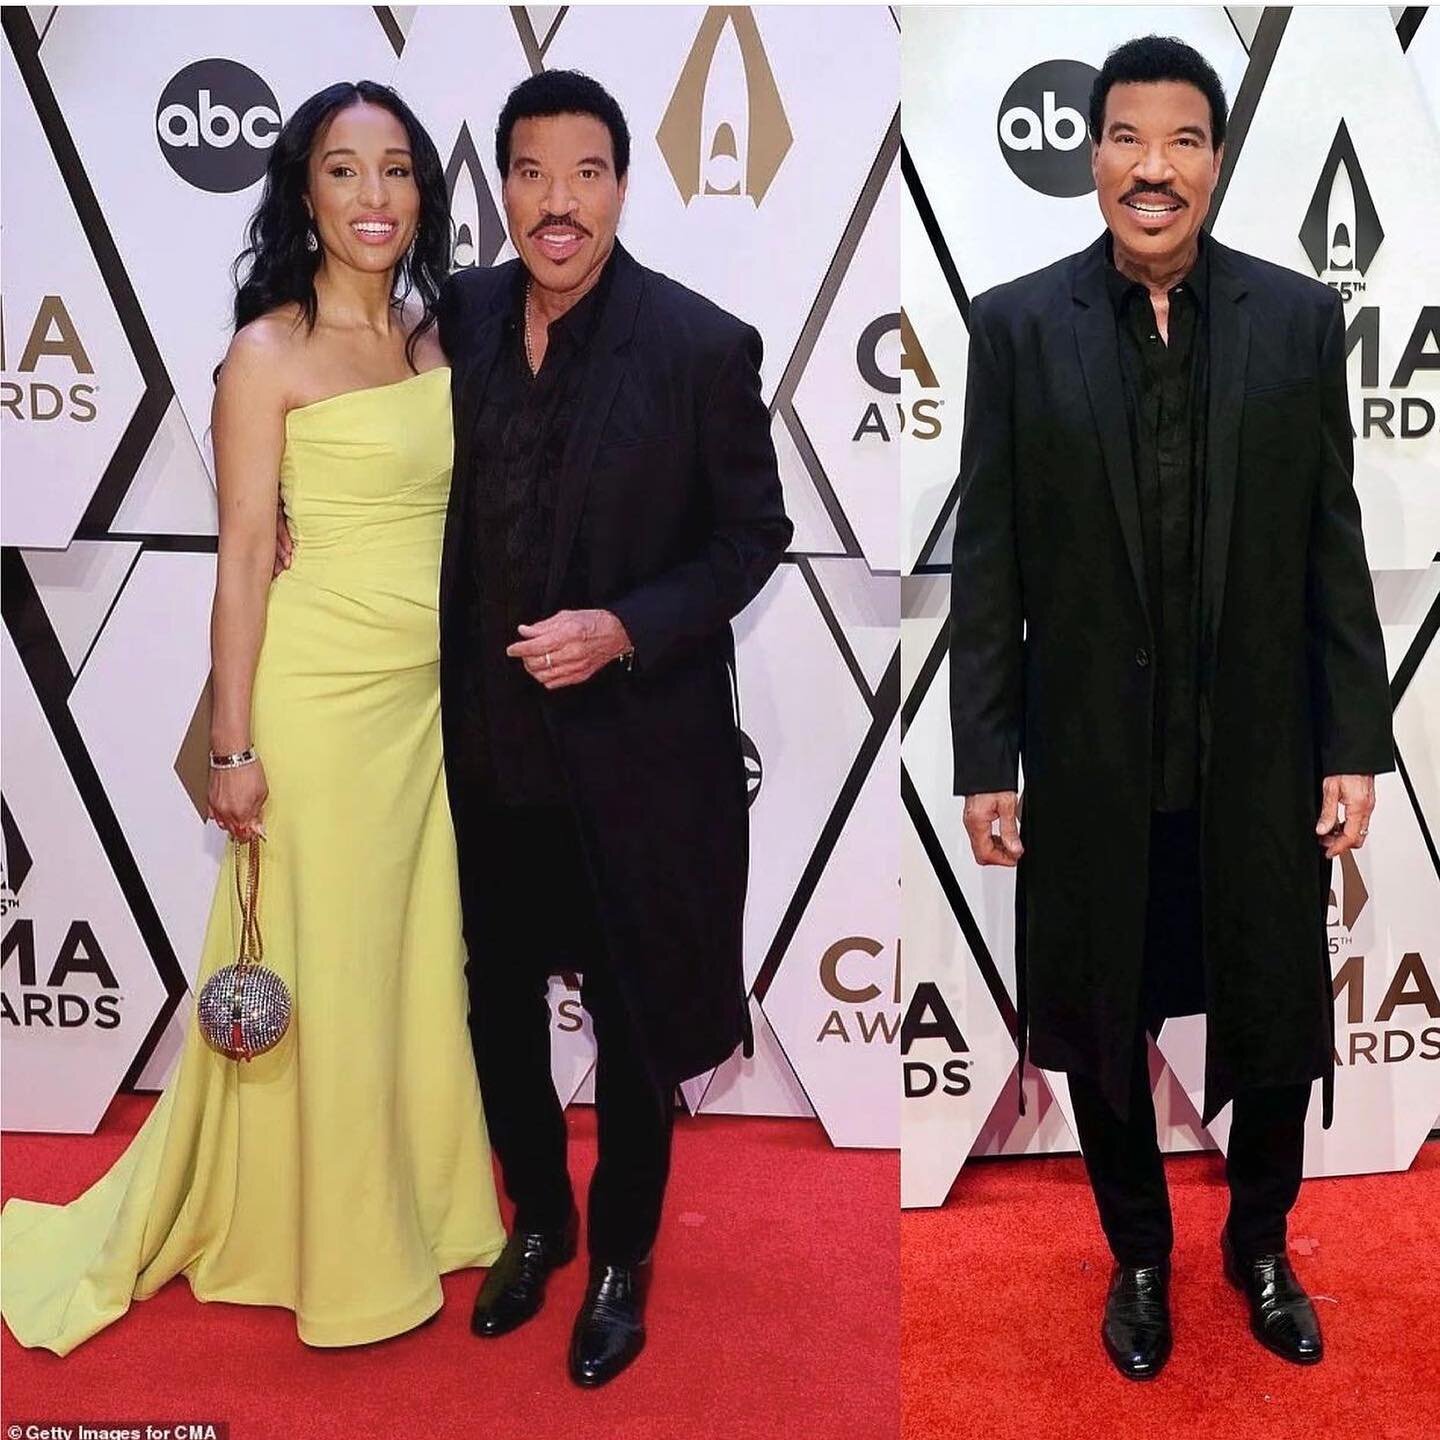 You both looked awesome, had a great time getting you both all glammed up! @lisaparigi_ @lionelrichie 

💄 @tongreenmakeup 

#hollywoodhairguy #hollywood #hair #cma #hairstyles #hollywood #cma #hair #makeup #hollywoodunlocked #cmaawards #lionelrichie